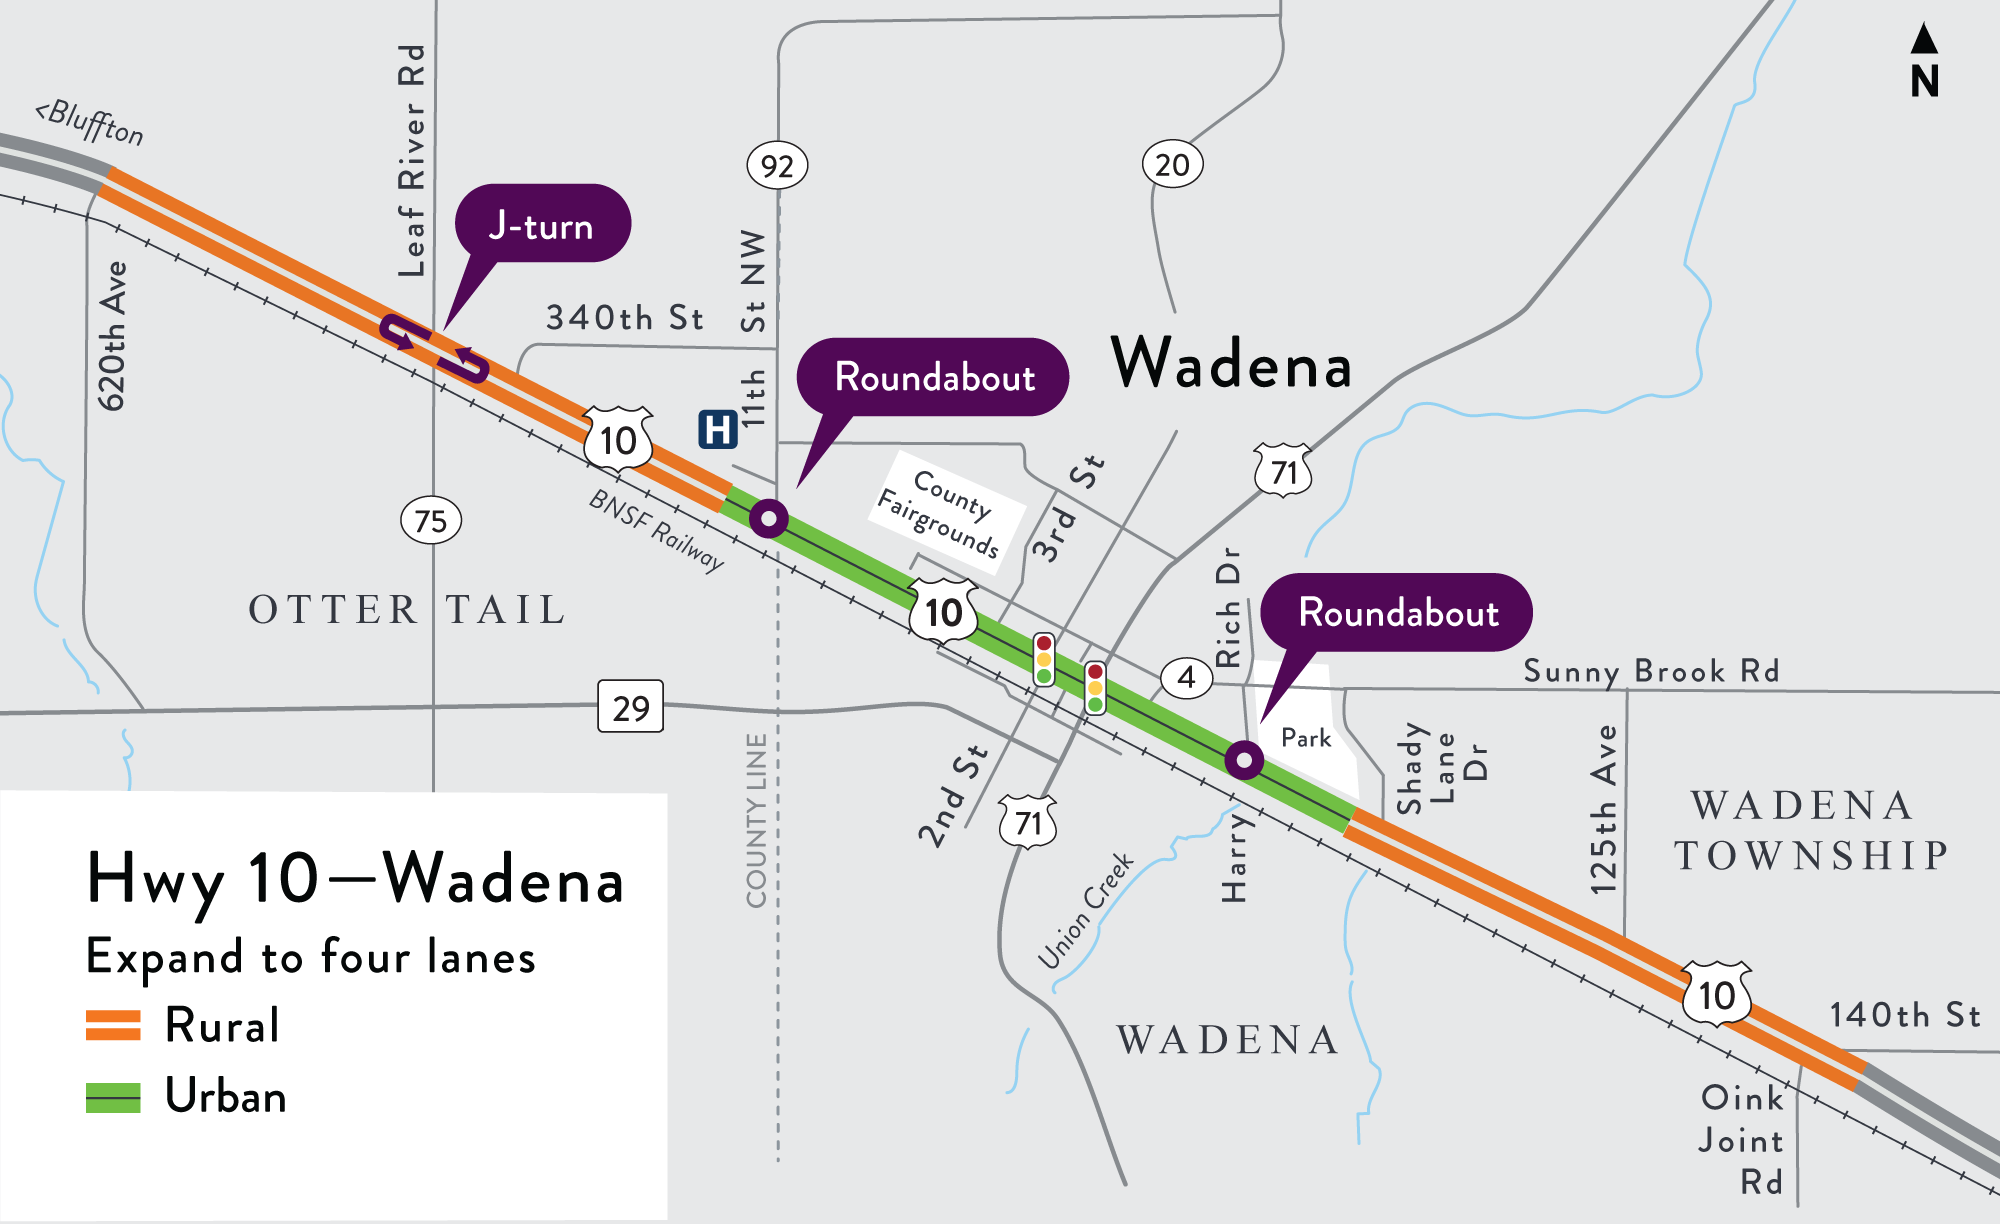 Hwy 10 project map location west to east of the city of Wadena